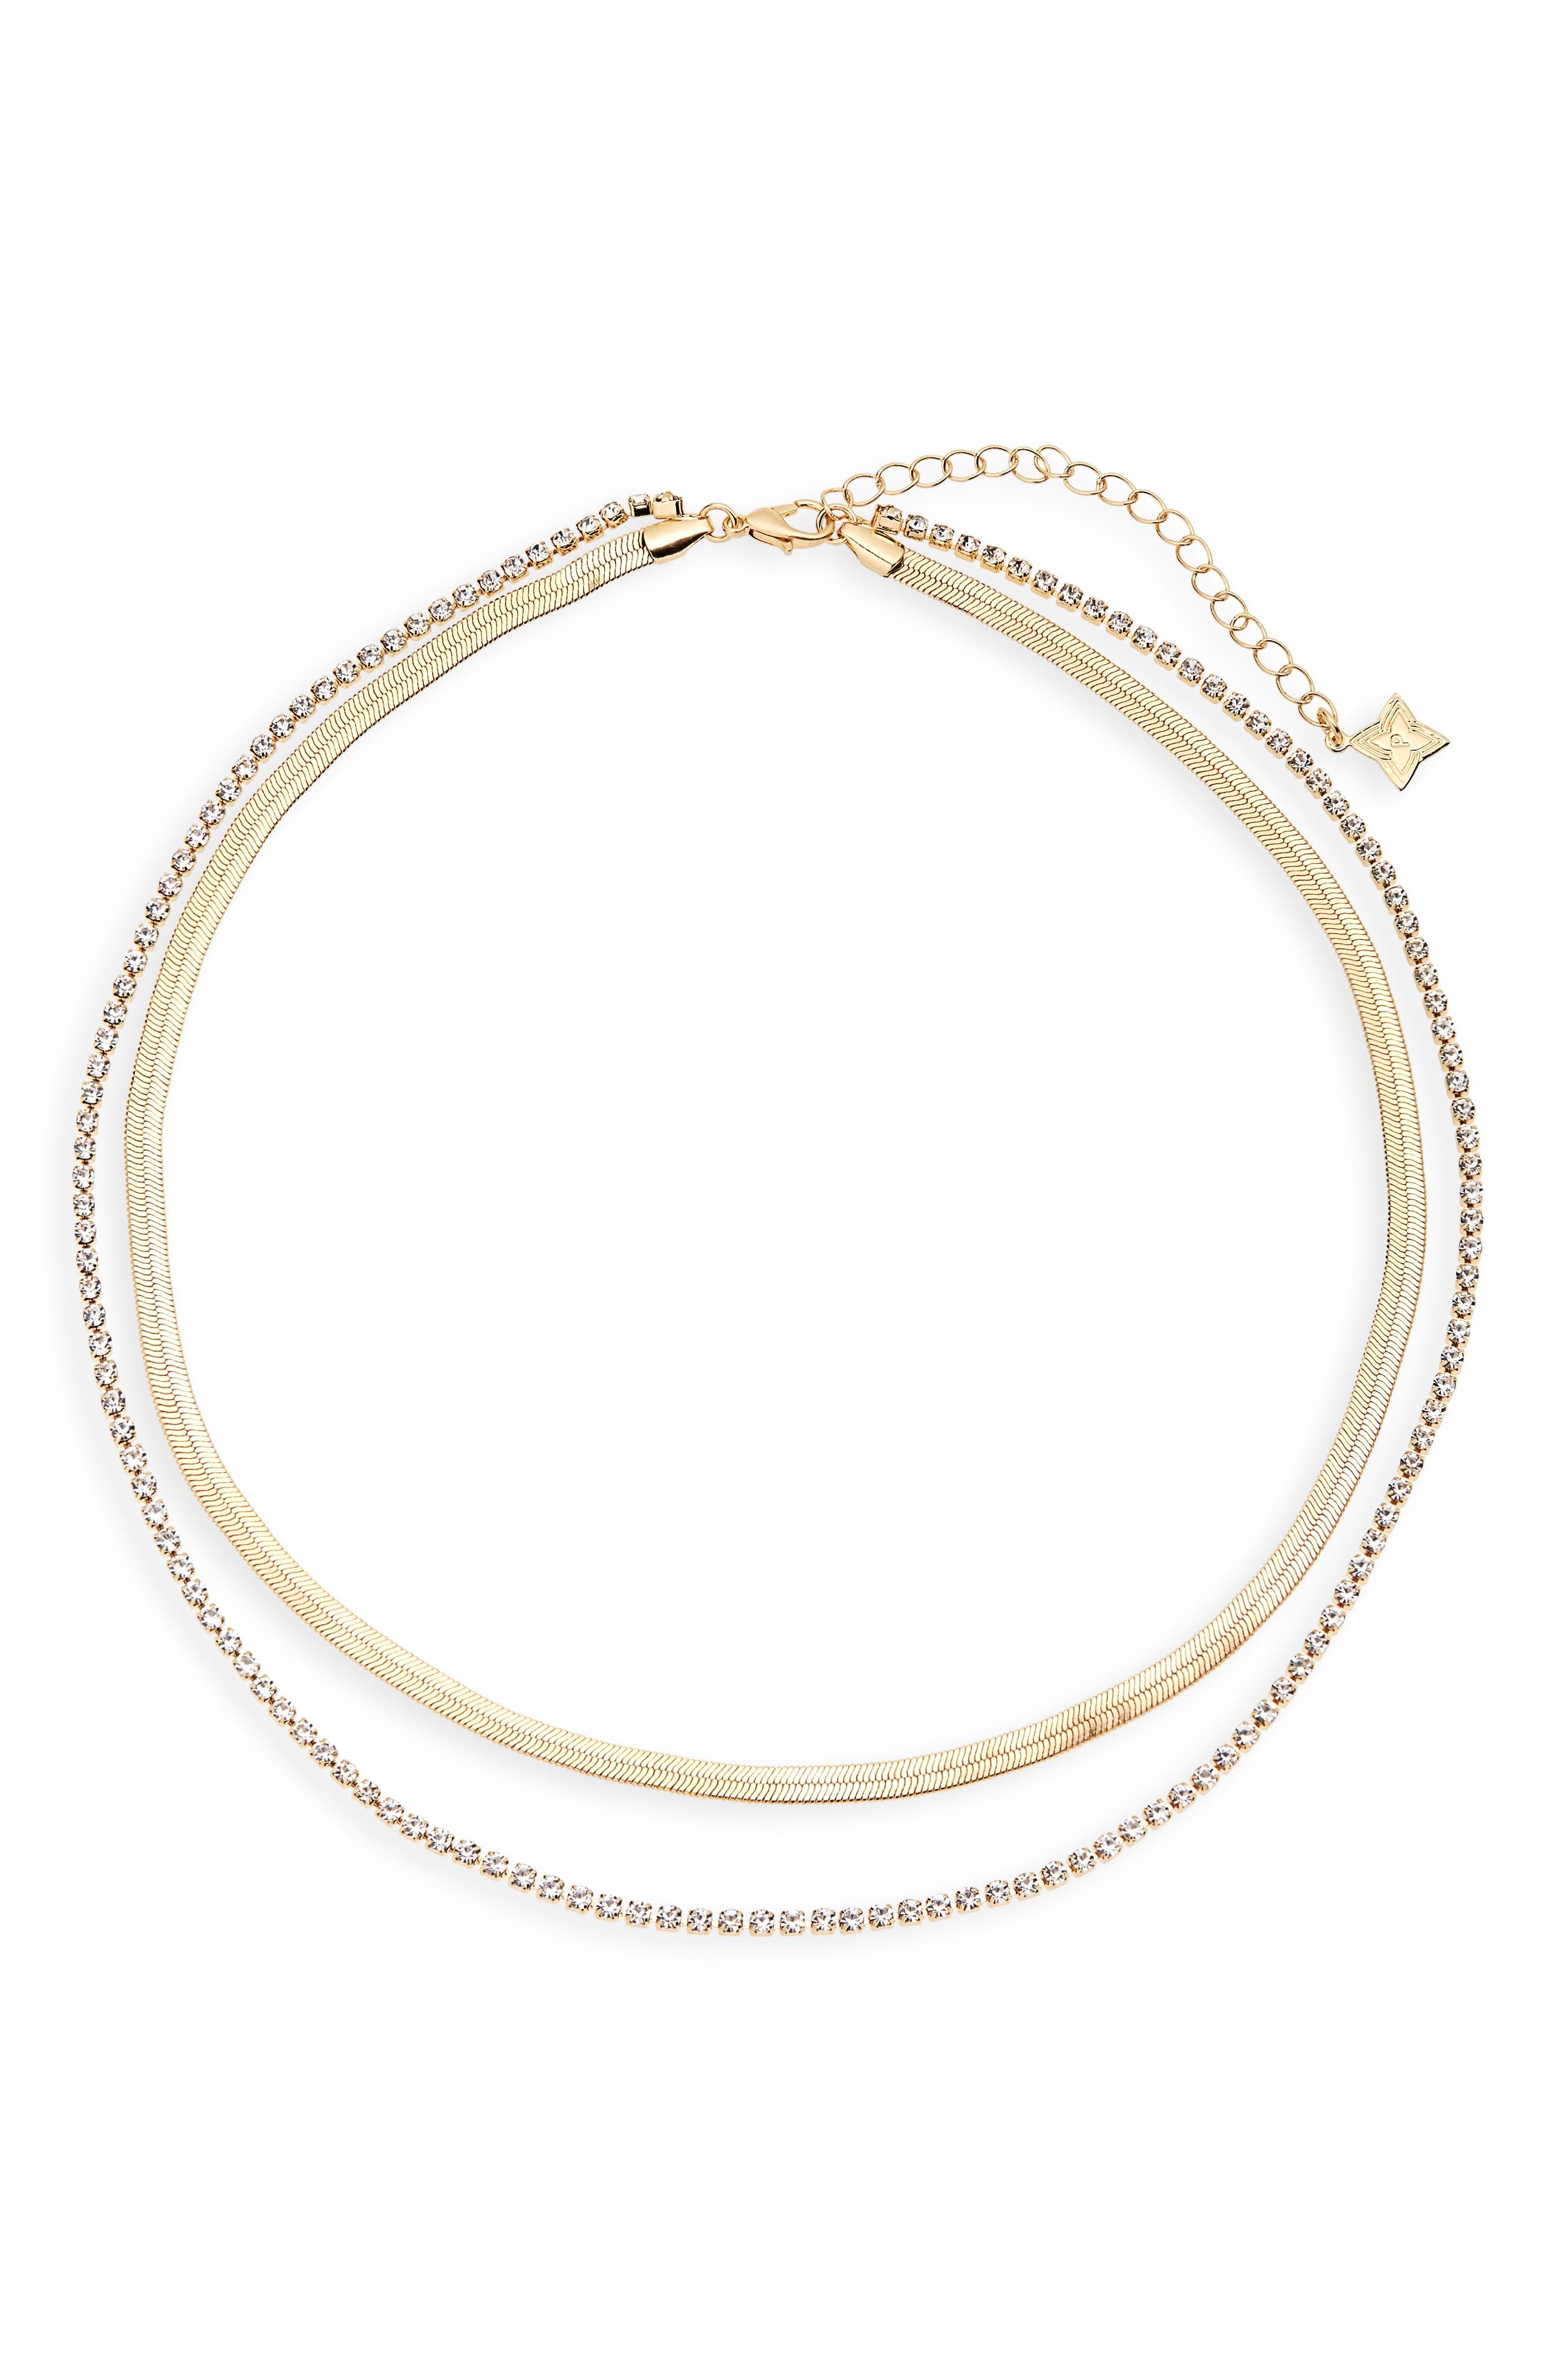 Panacea Snake Chain & Tennis Chain Multistrand Necklace in Gold at Nordstrom